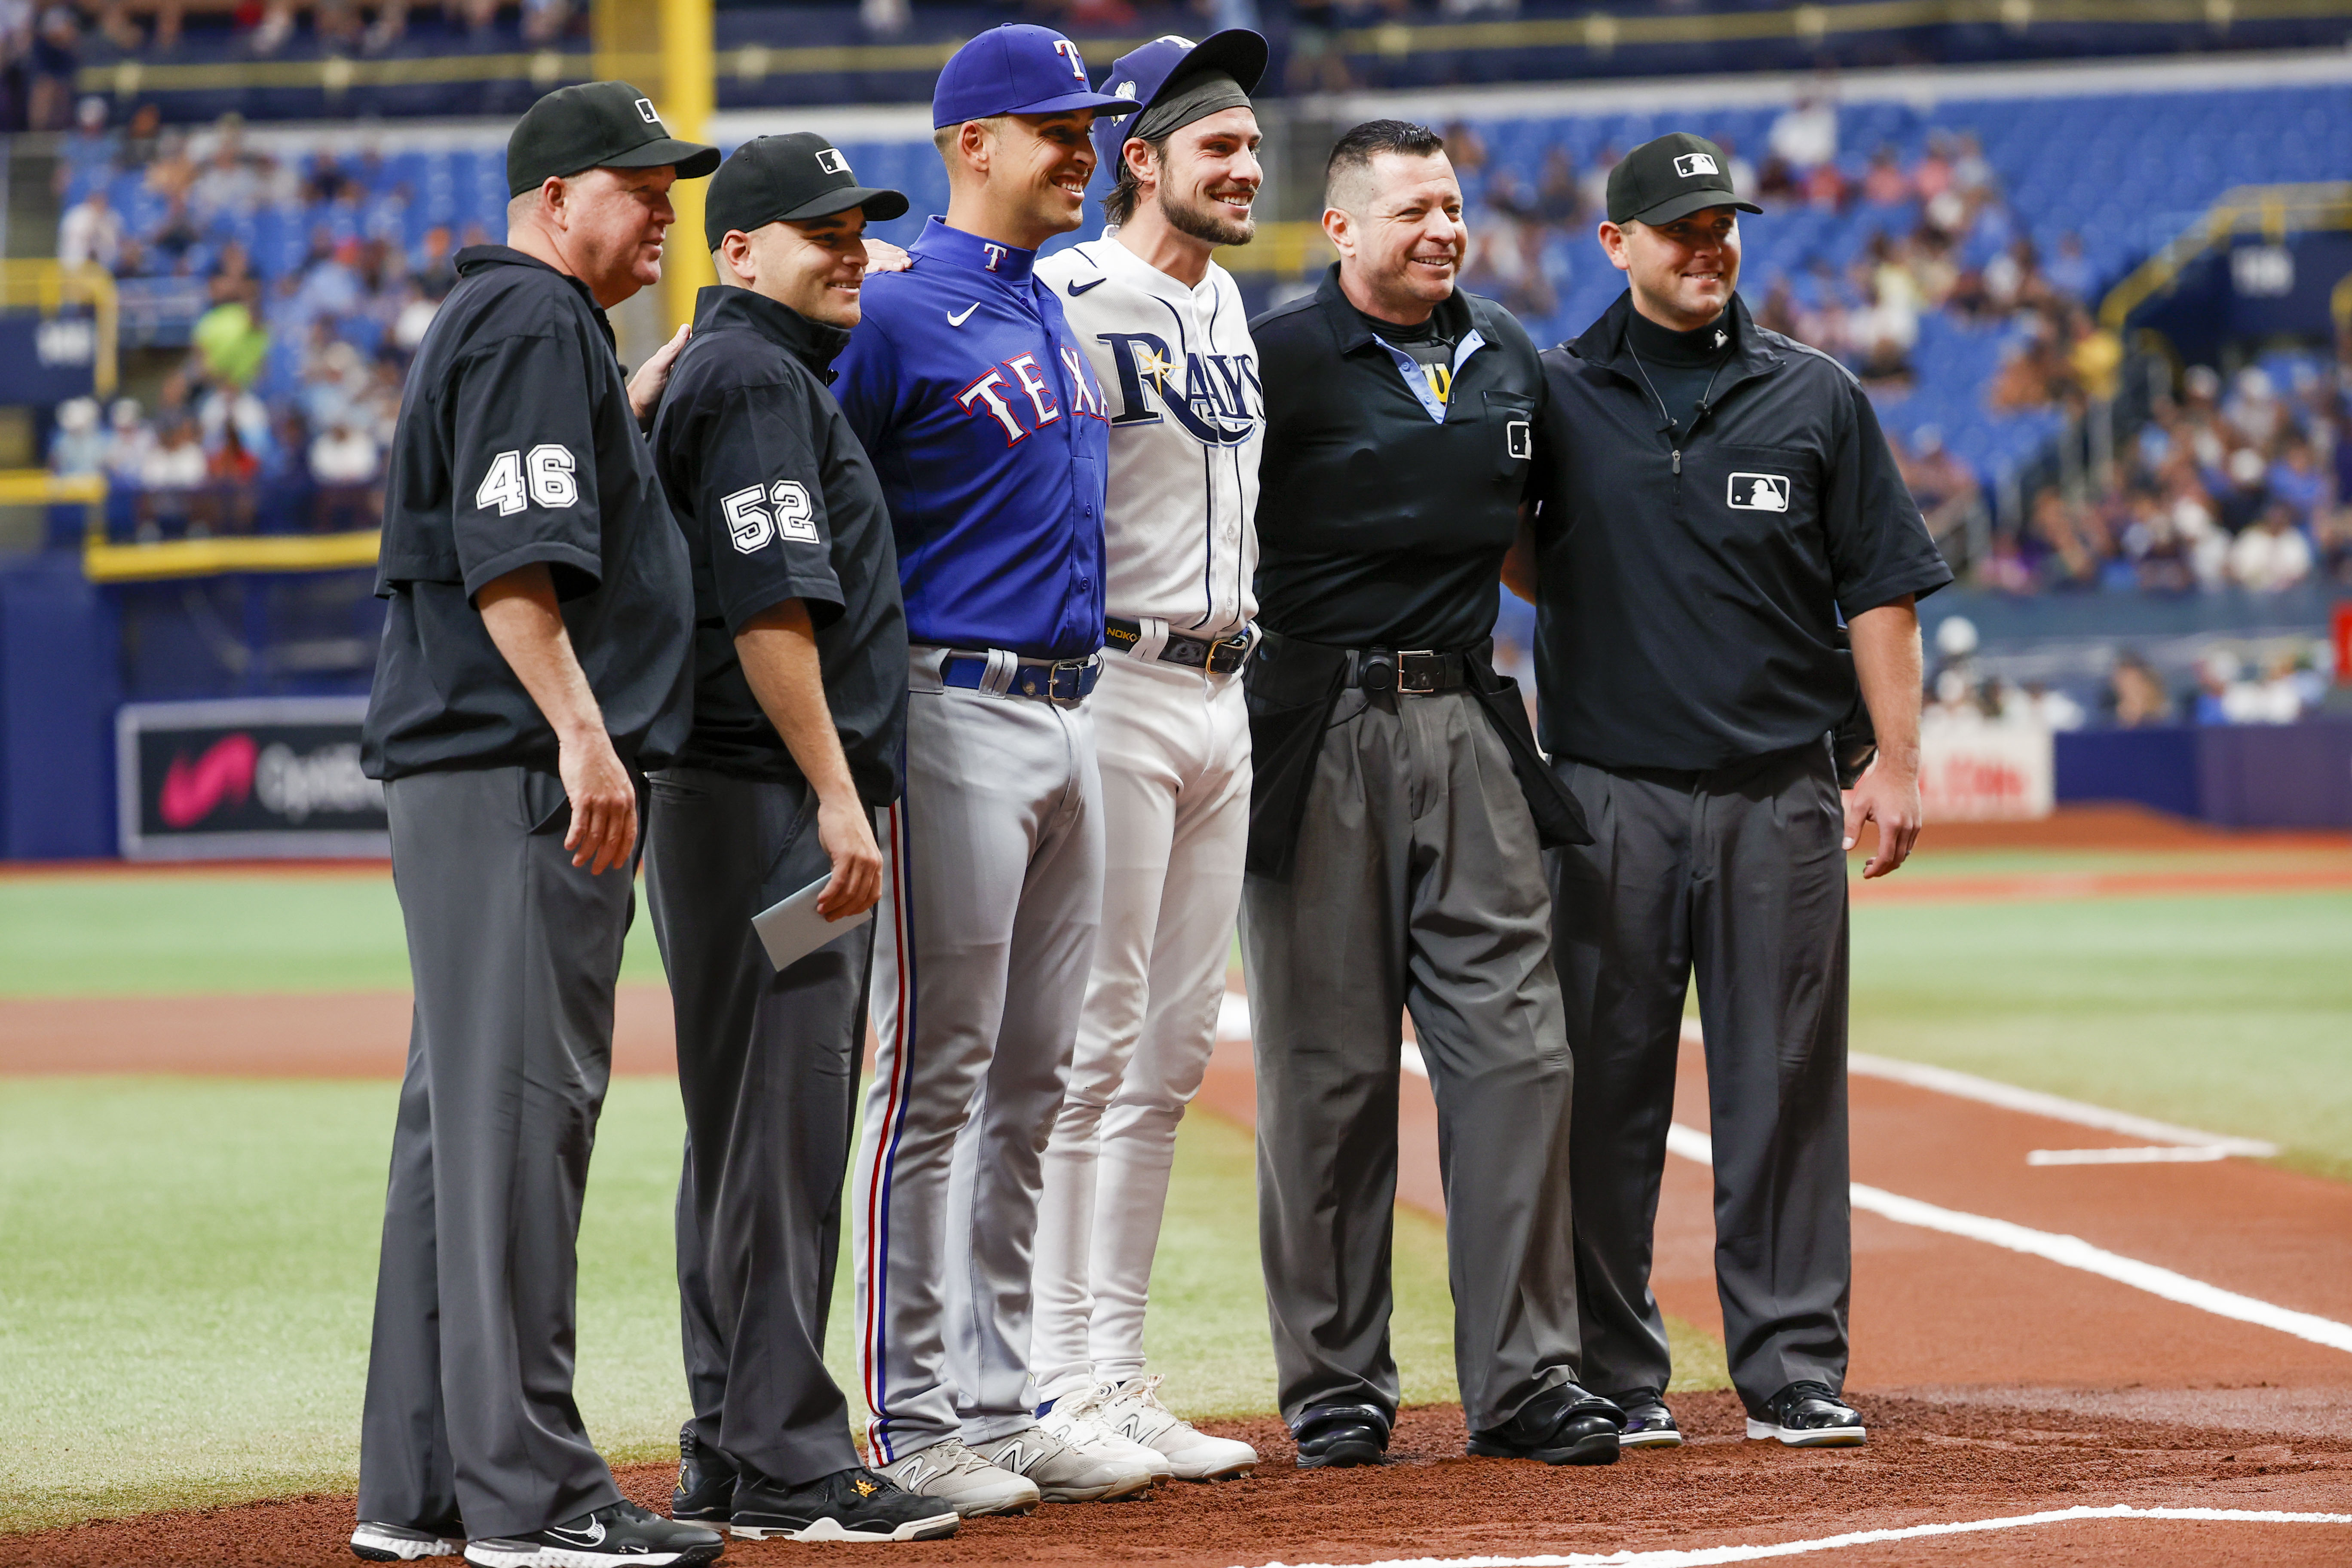 Rays' Josh Lowe takes the brothers battle, but Rangers win the game